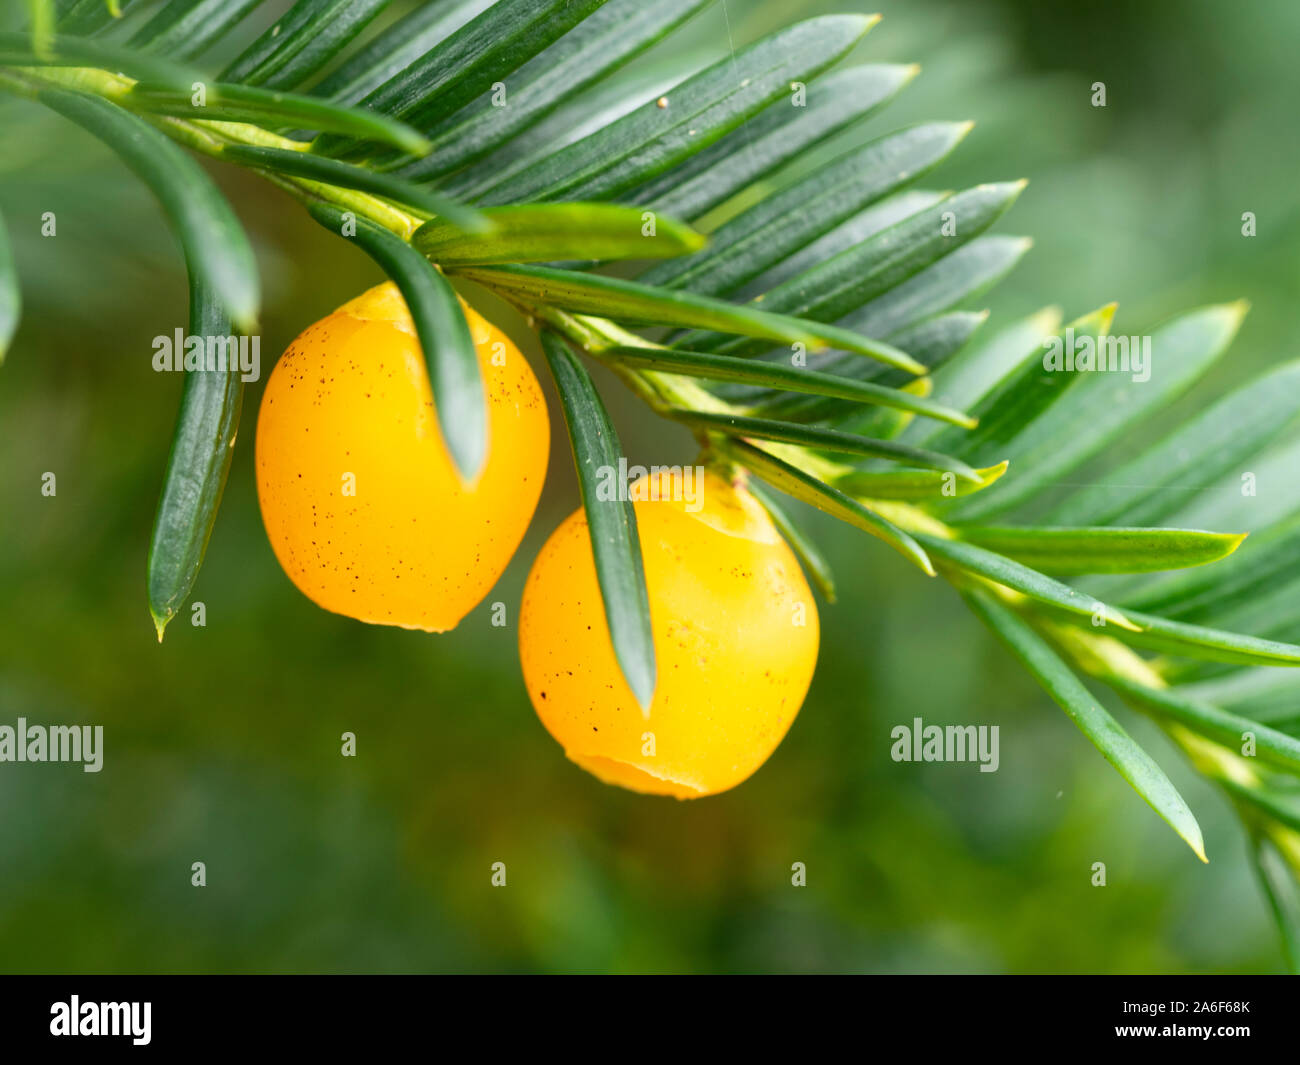 Poisonous yellow autumn berries of the evergreen yew tree, Taxus baccata 'Lutea' Stock Photo